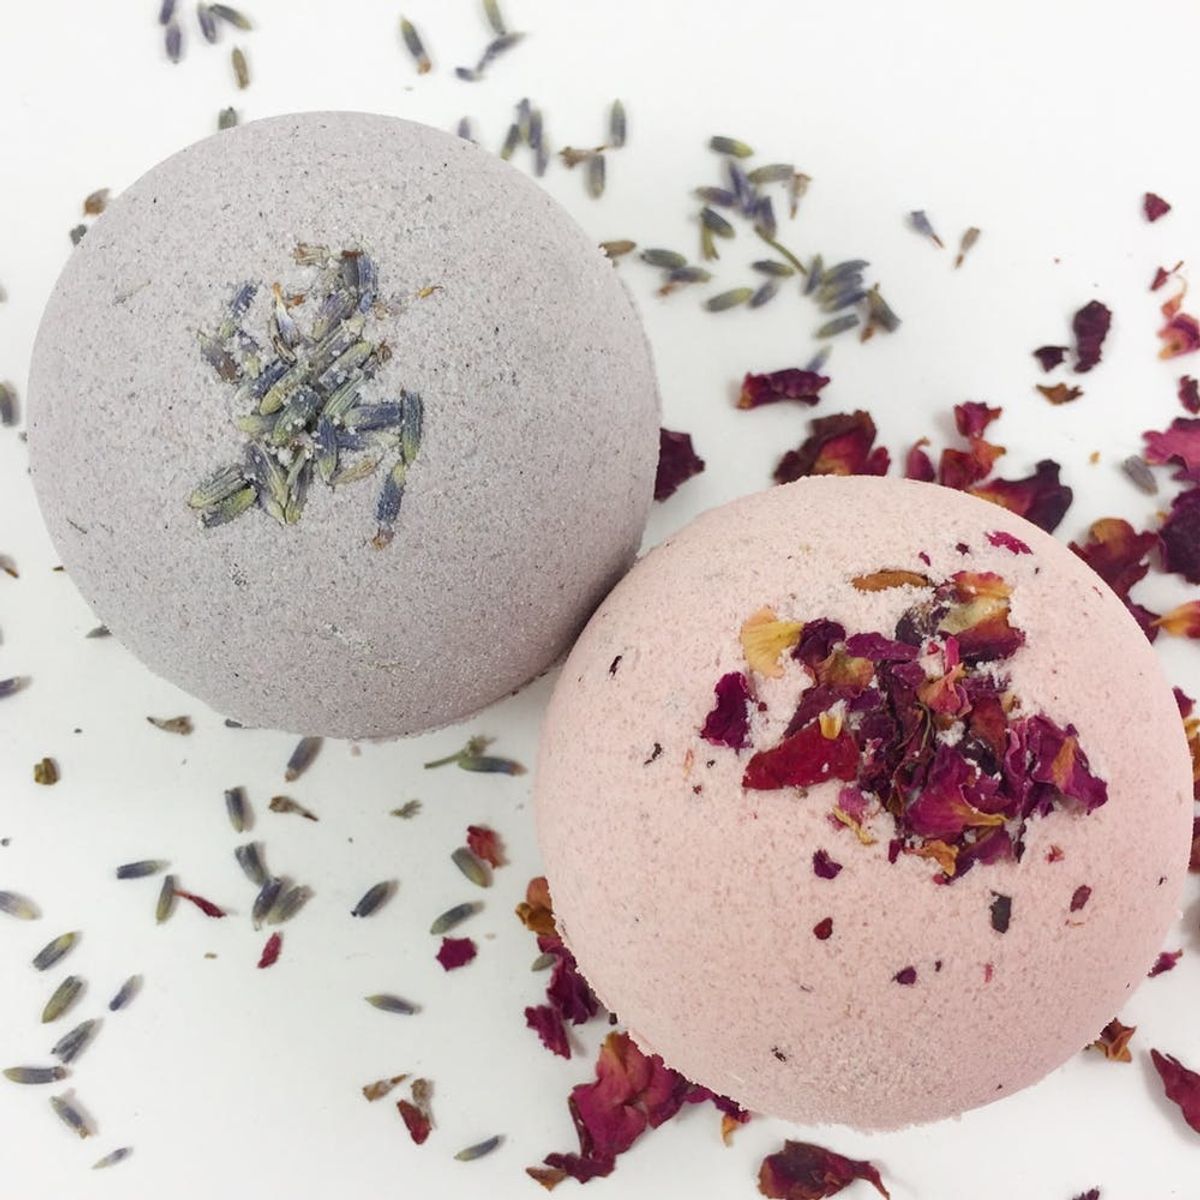 30 Bath Bomb Recipes to Amp Up Your Bathing Routine